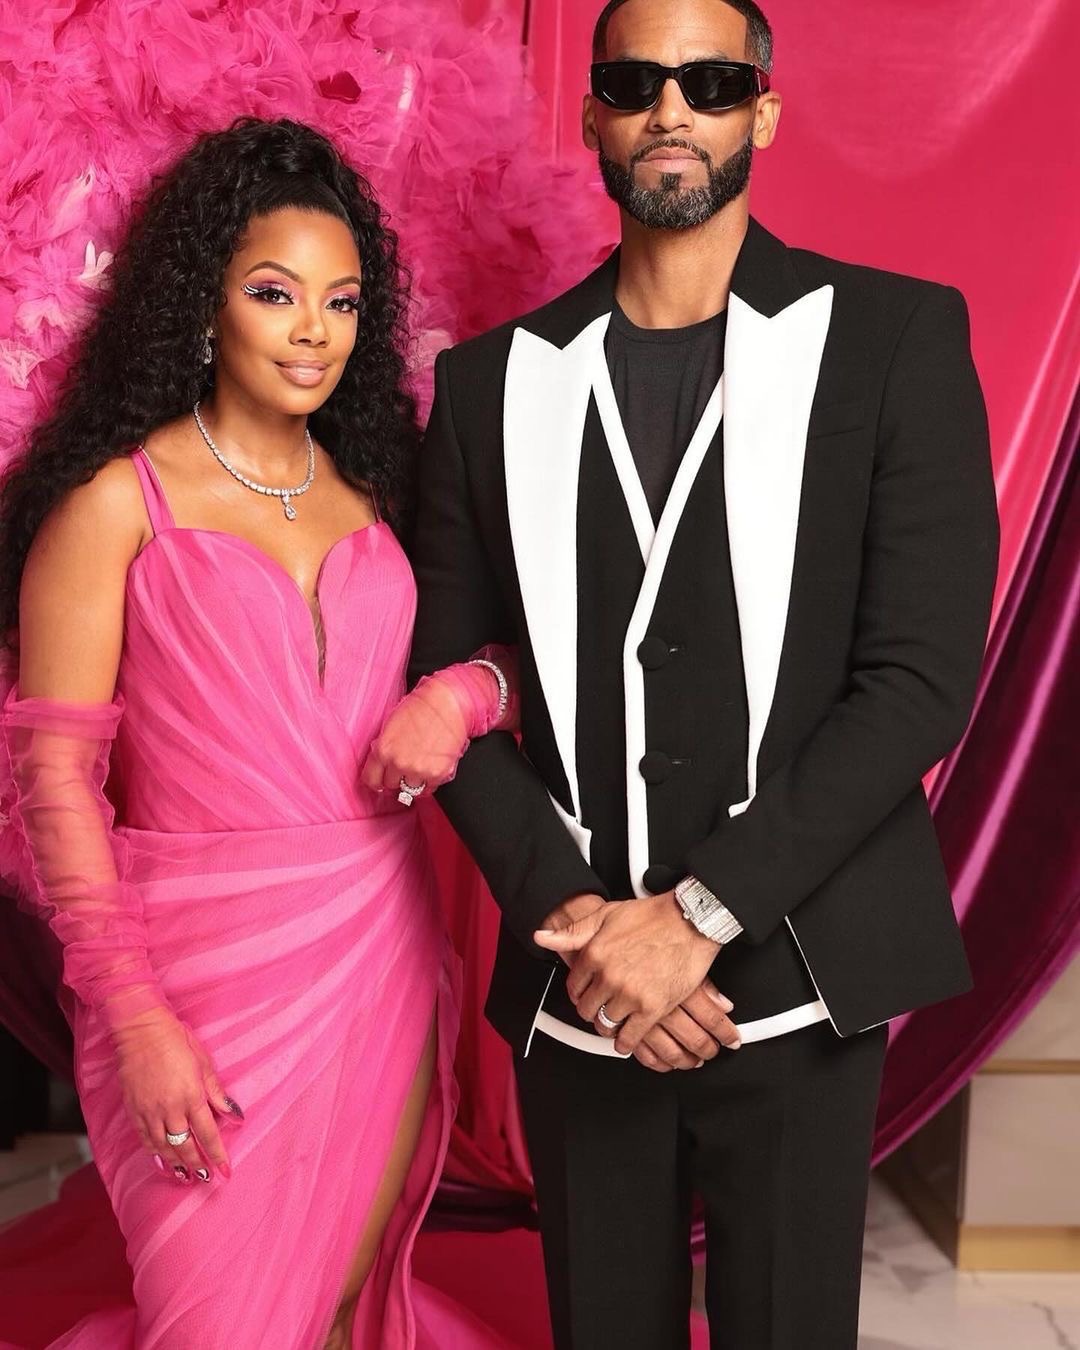 Mielle Organics CEO Monique Rodriguez Celebrated Her 40th Birthday in a Pink Custom Nicole Felicia Gown with Rene Caovilla Heels to her Cirque Du Moleil Theme Party More 2